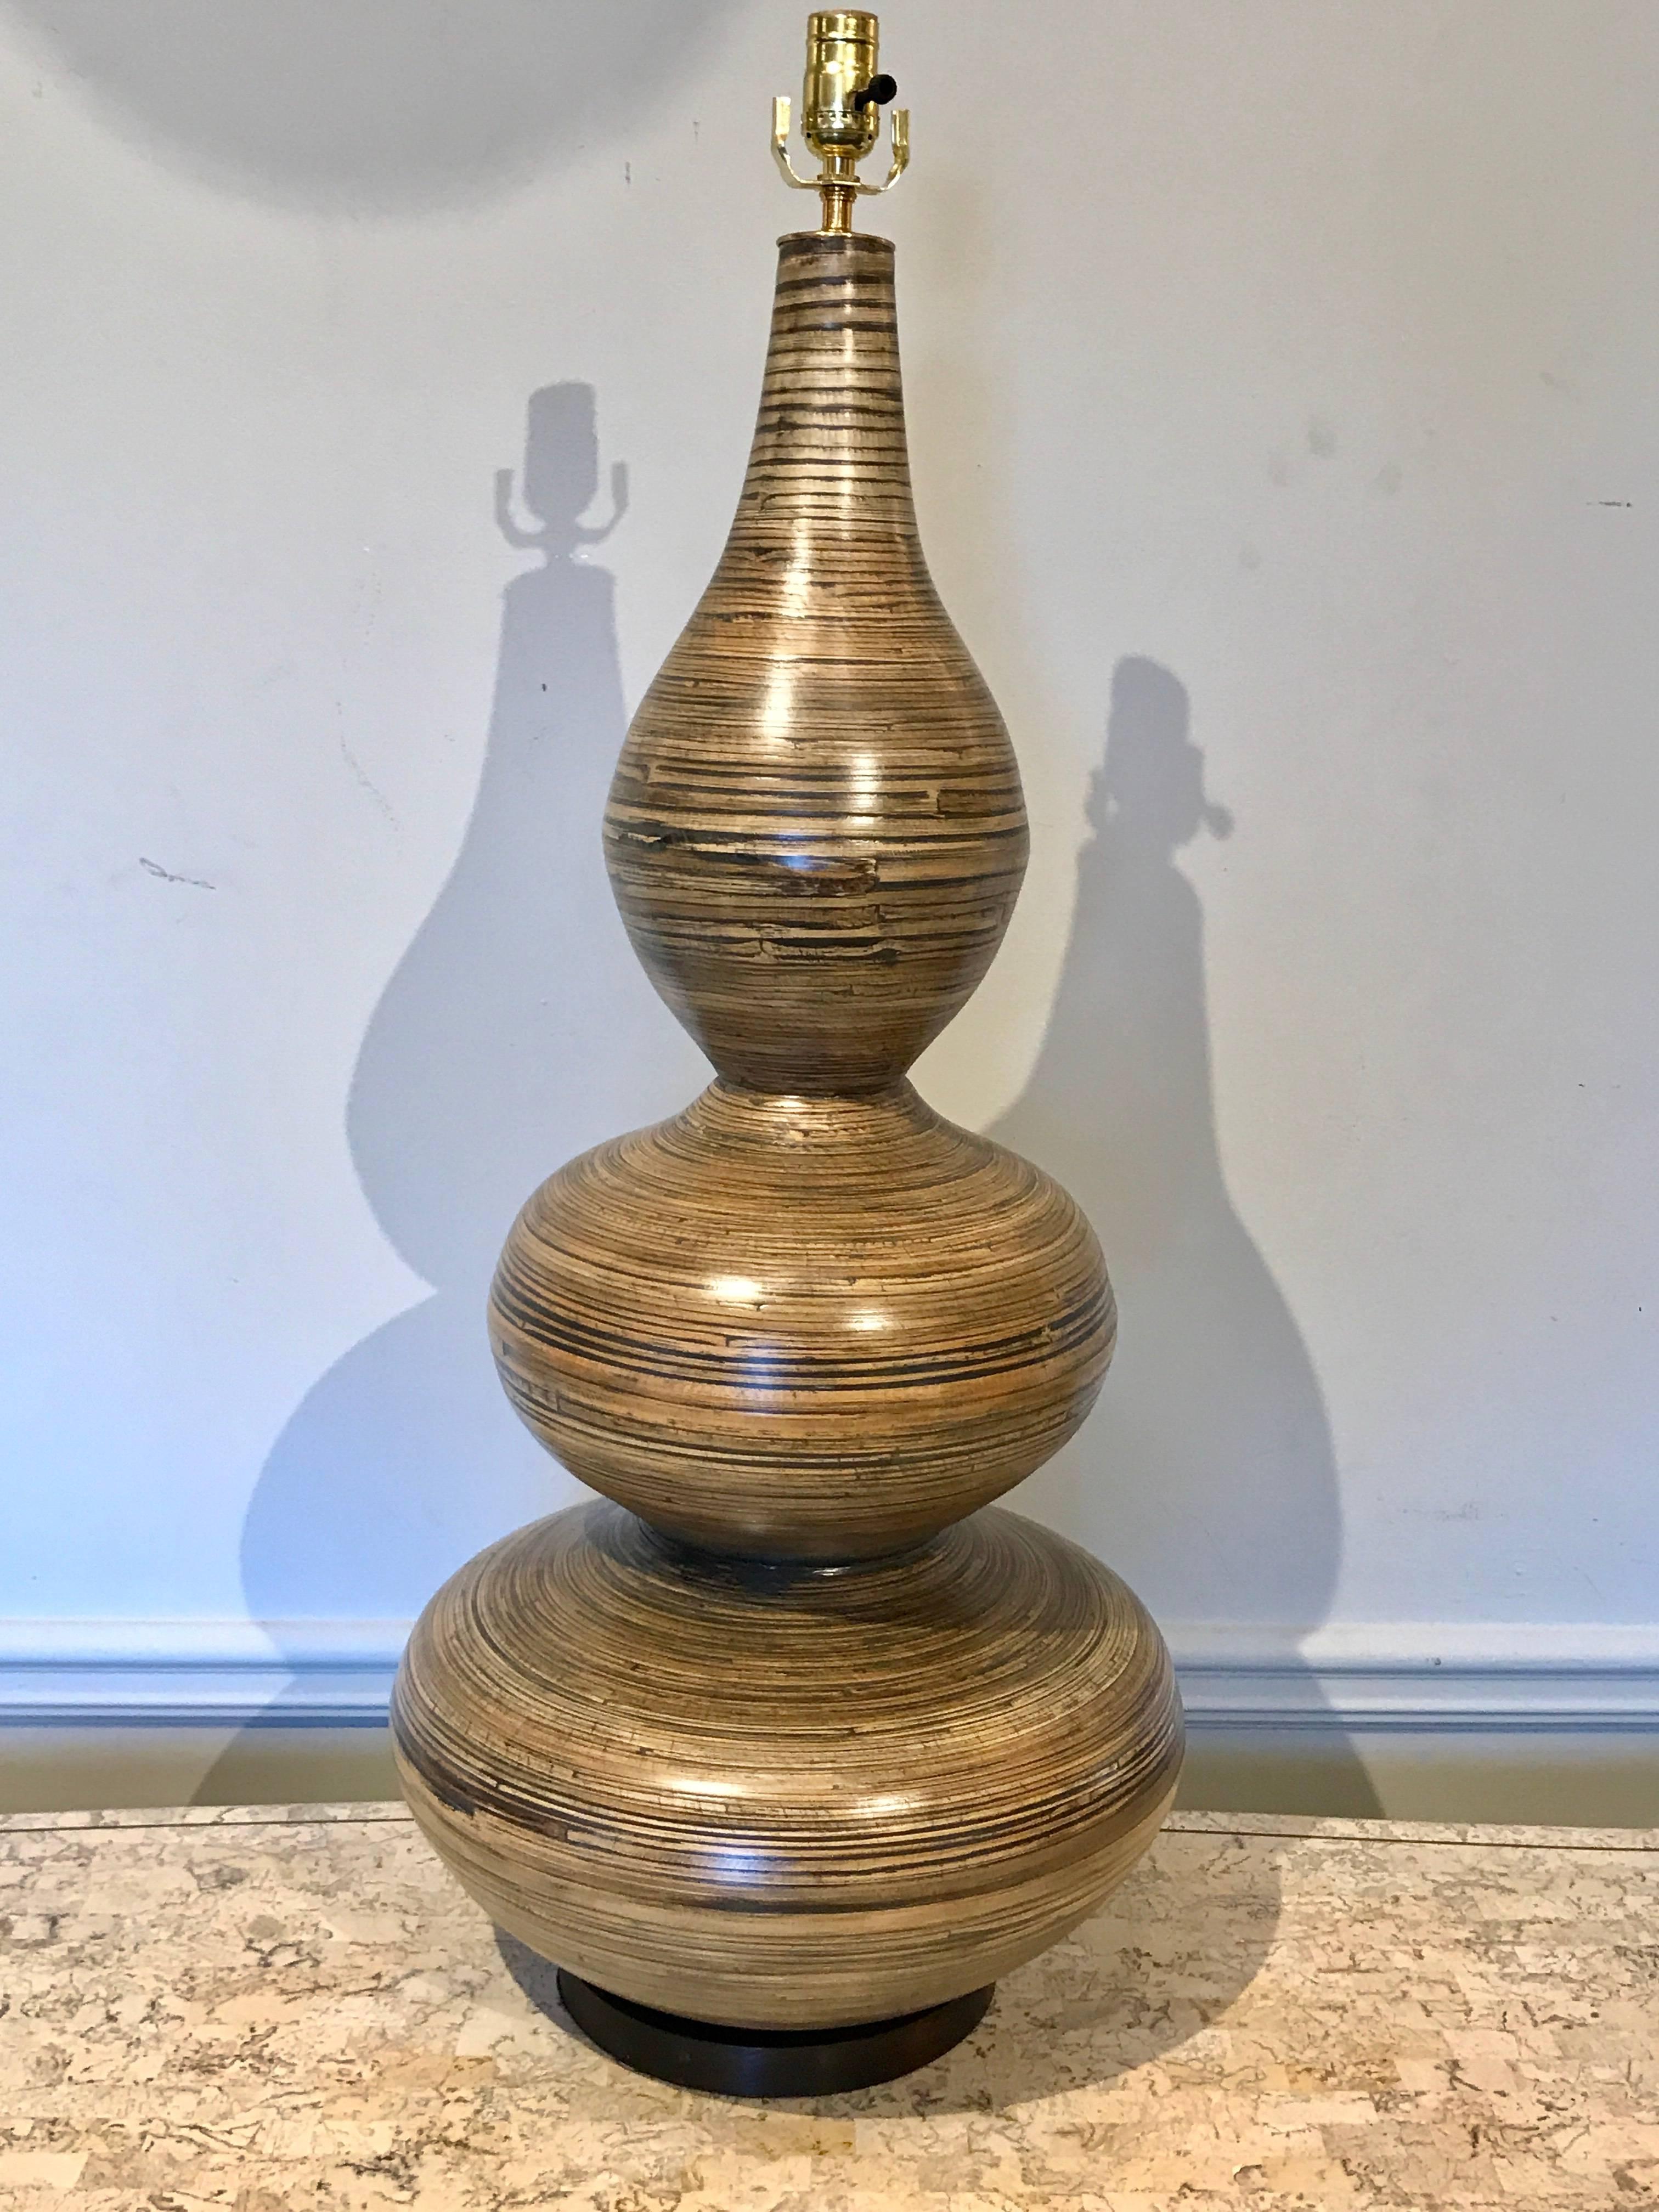 A stunning pair of large lacquered bamboo gourd lamps, each one standing 42" high to top of the socket 39" to the top of the vase, raised on custom circular ebonized wood plinth bases.